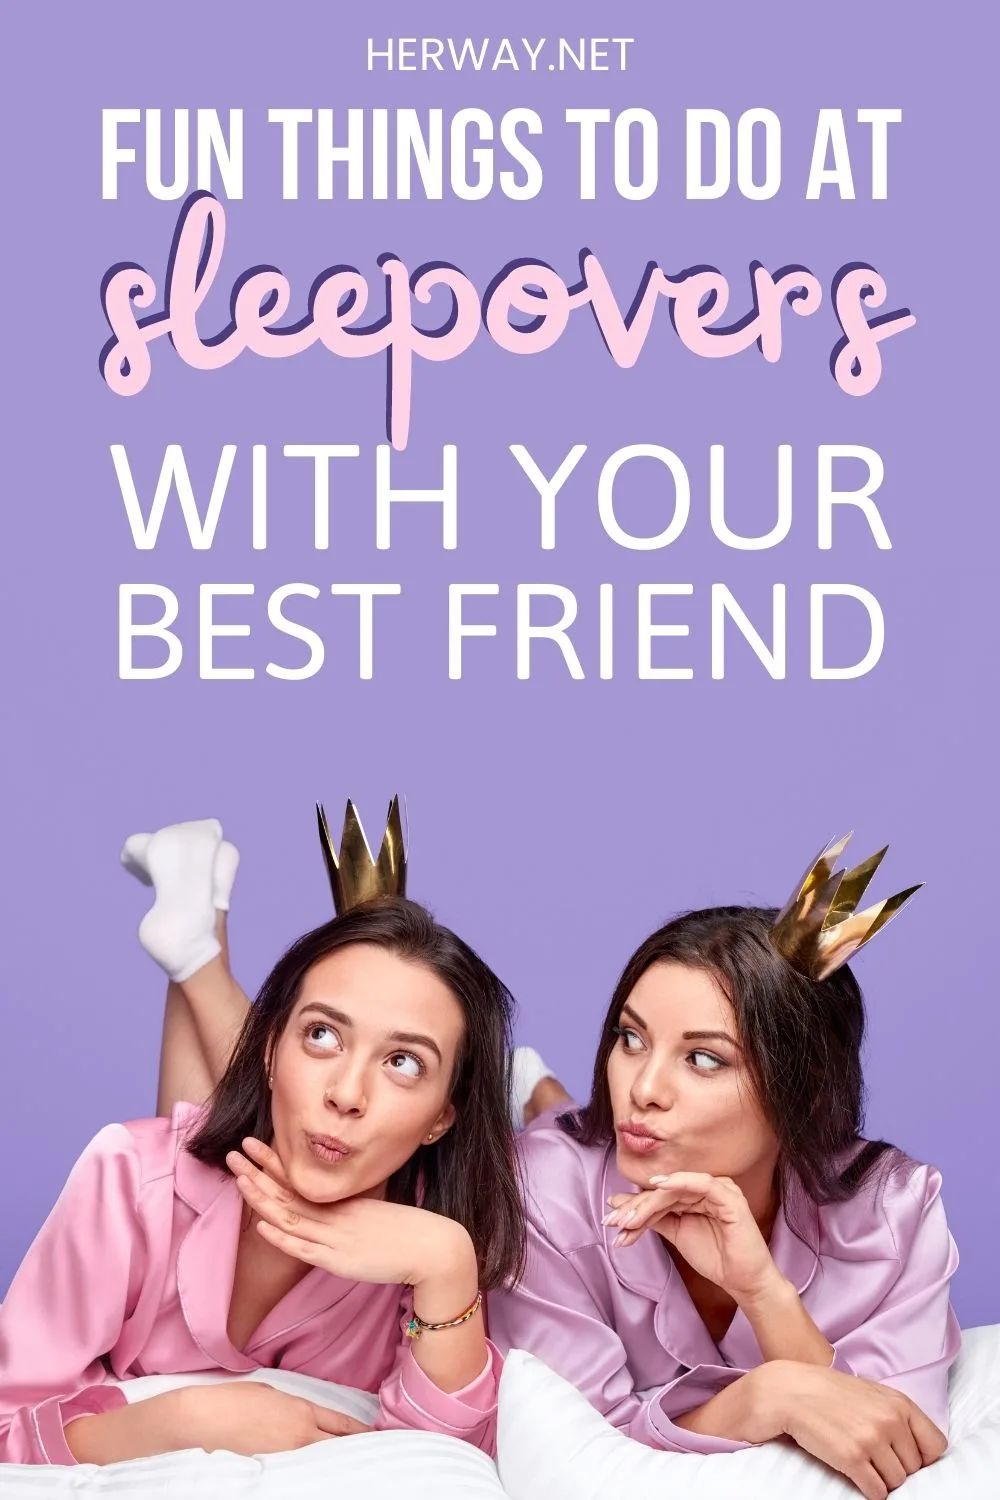 50+ Fun Things To Do At Sleepovers With Your Best Friend Pinterest